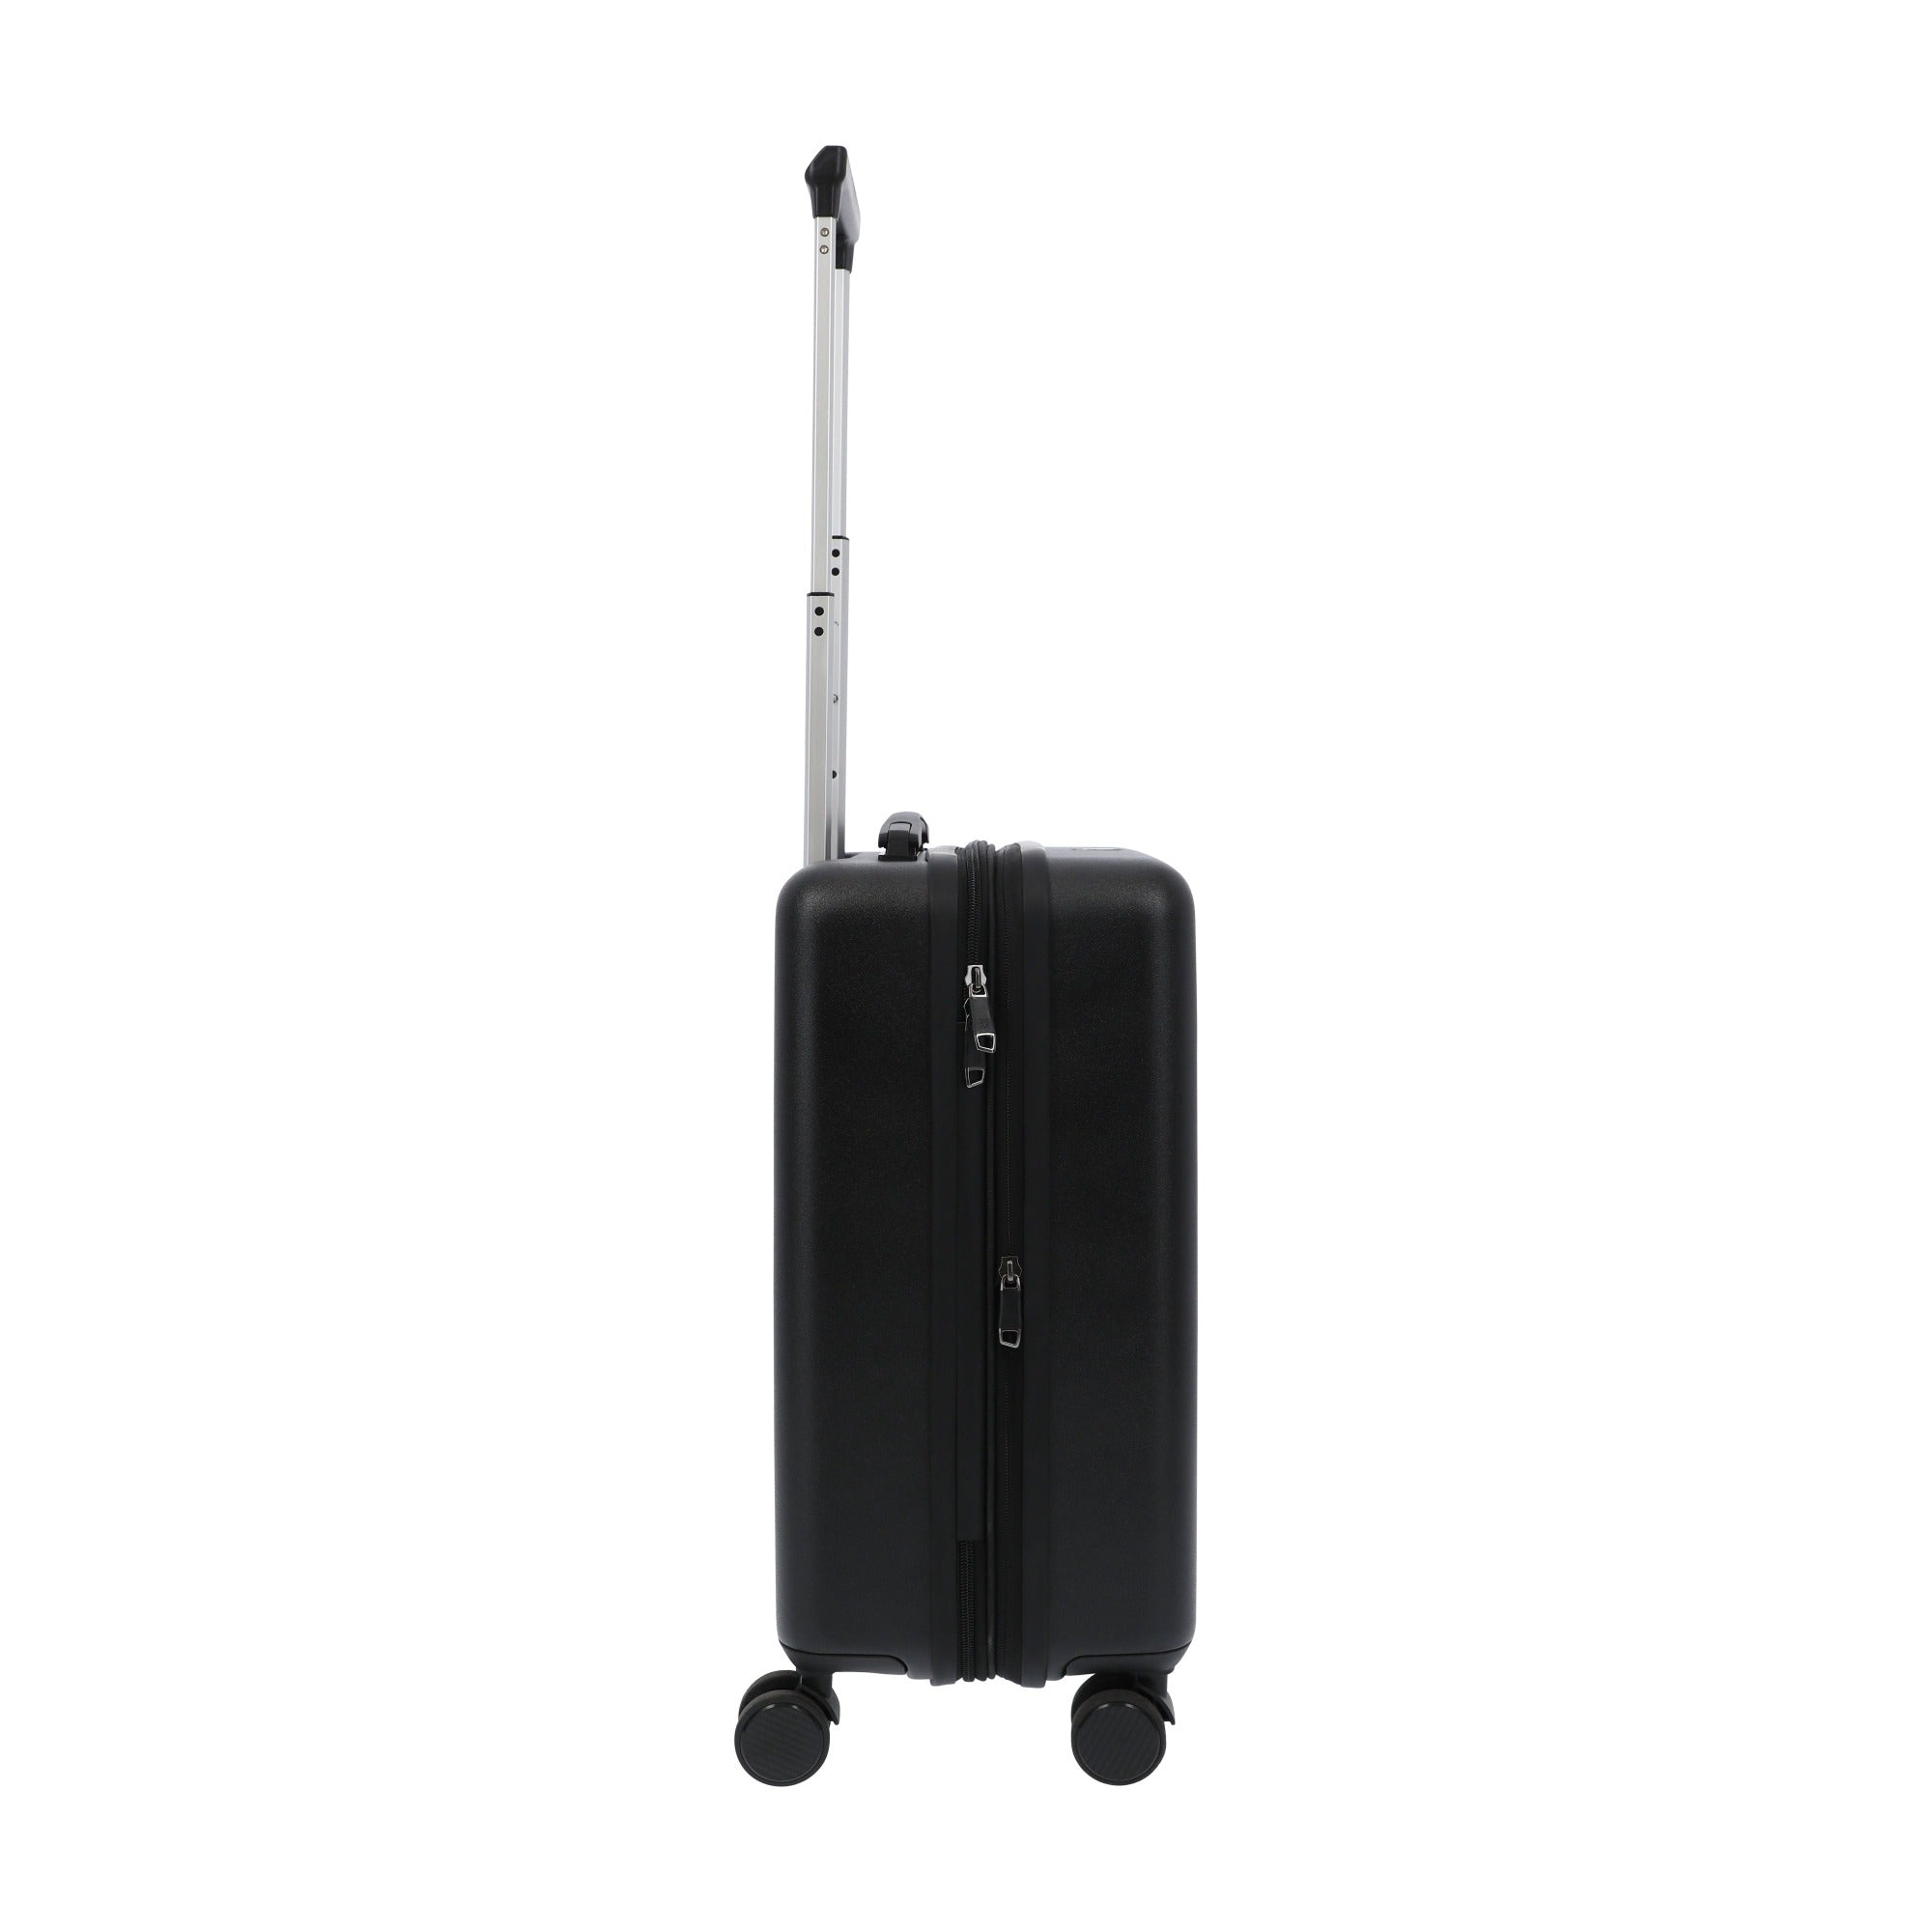 black carry-on luggage spinner suitcase by Ful